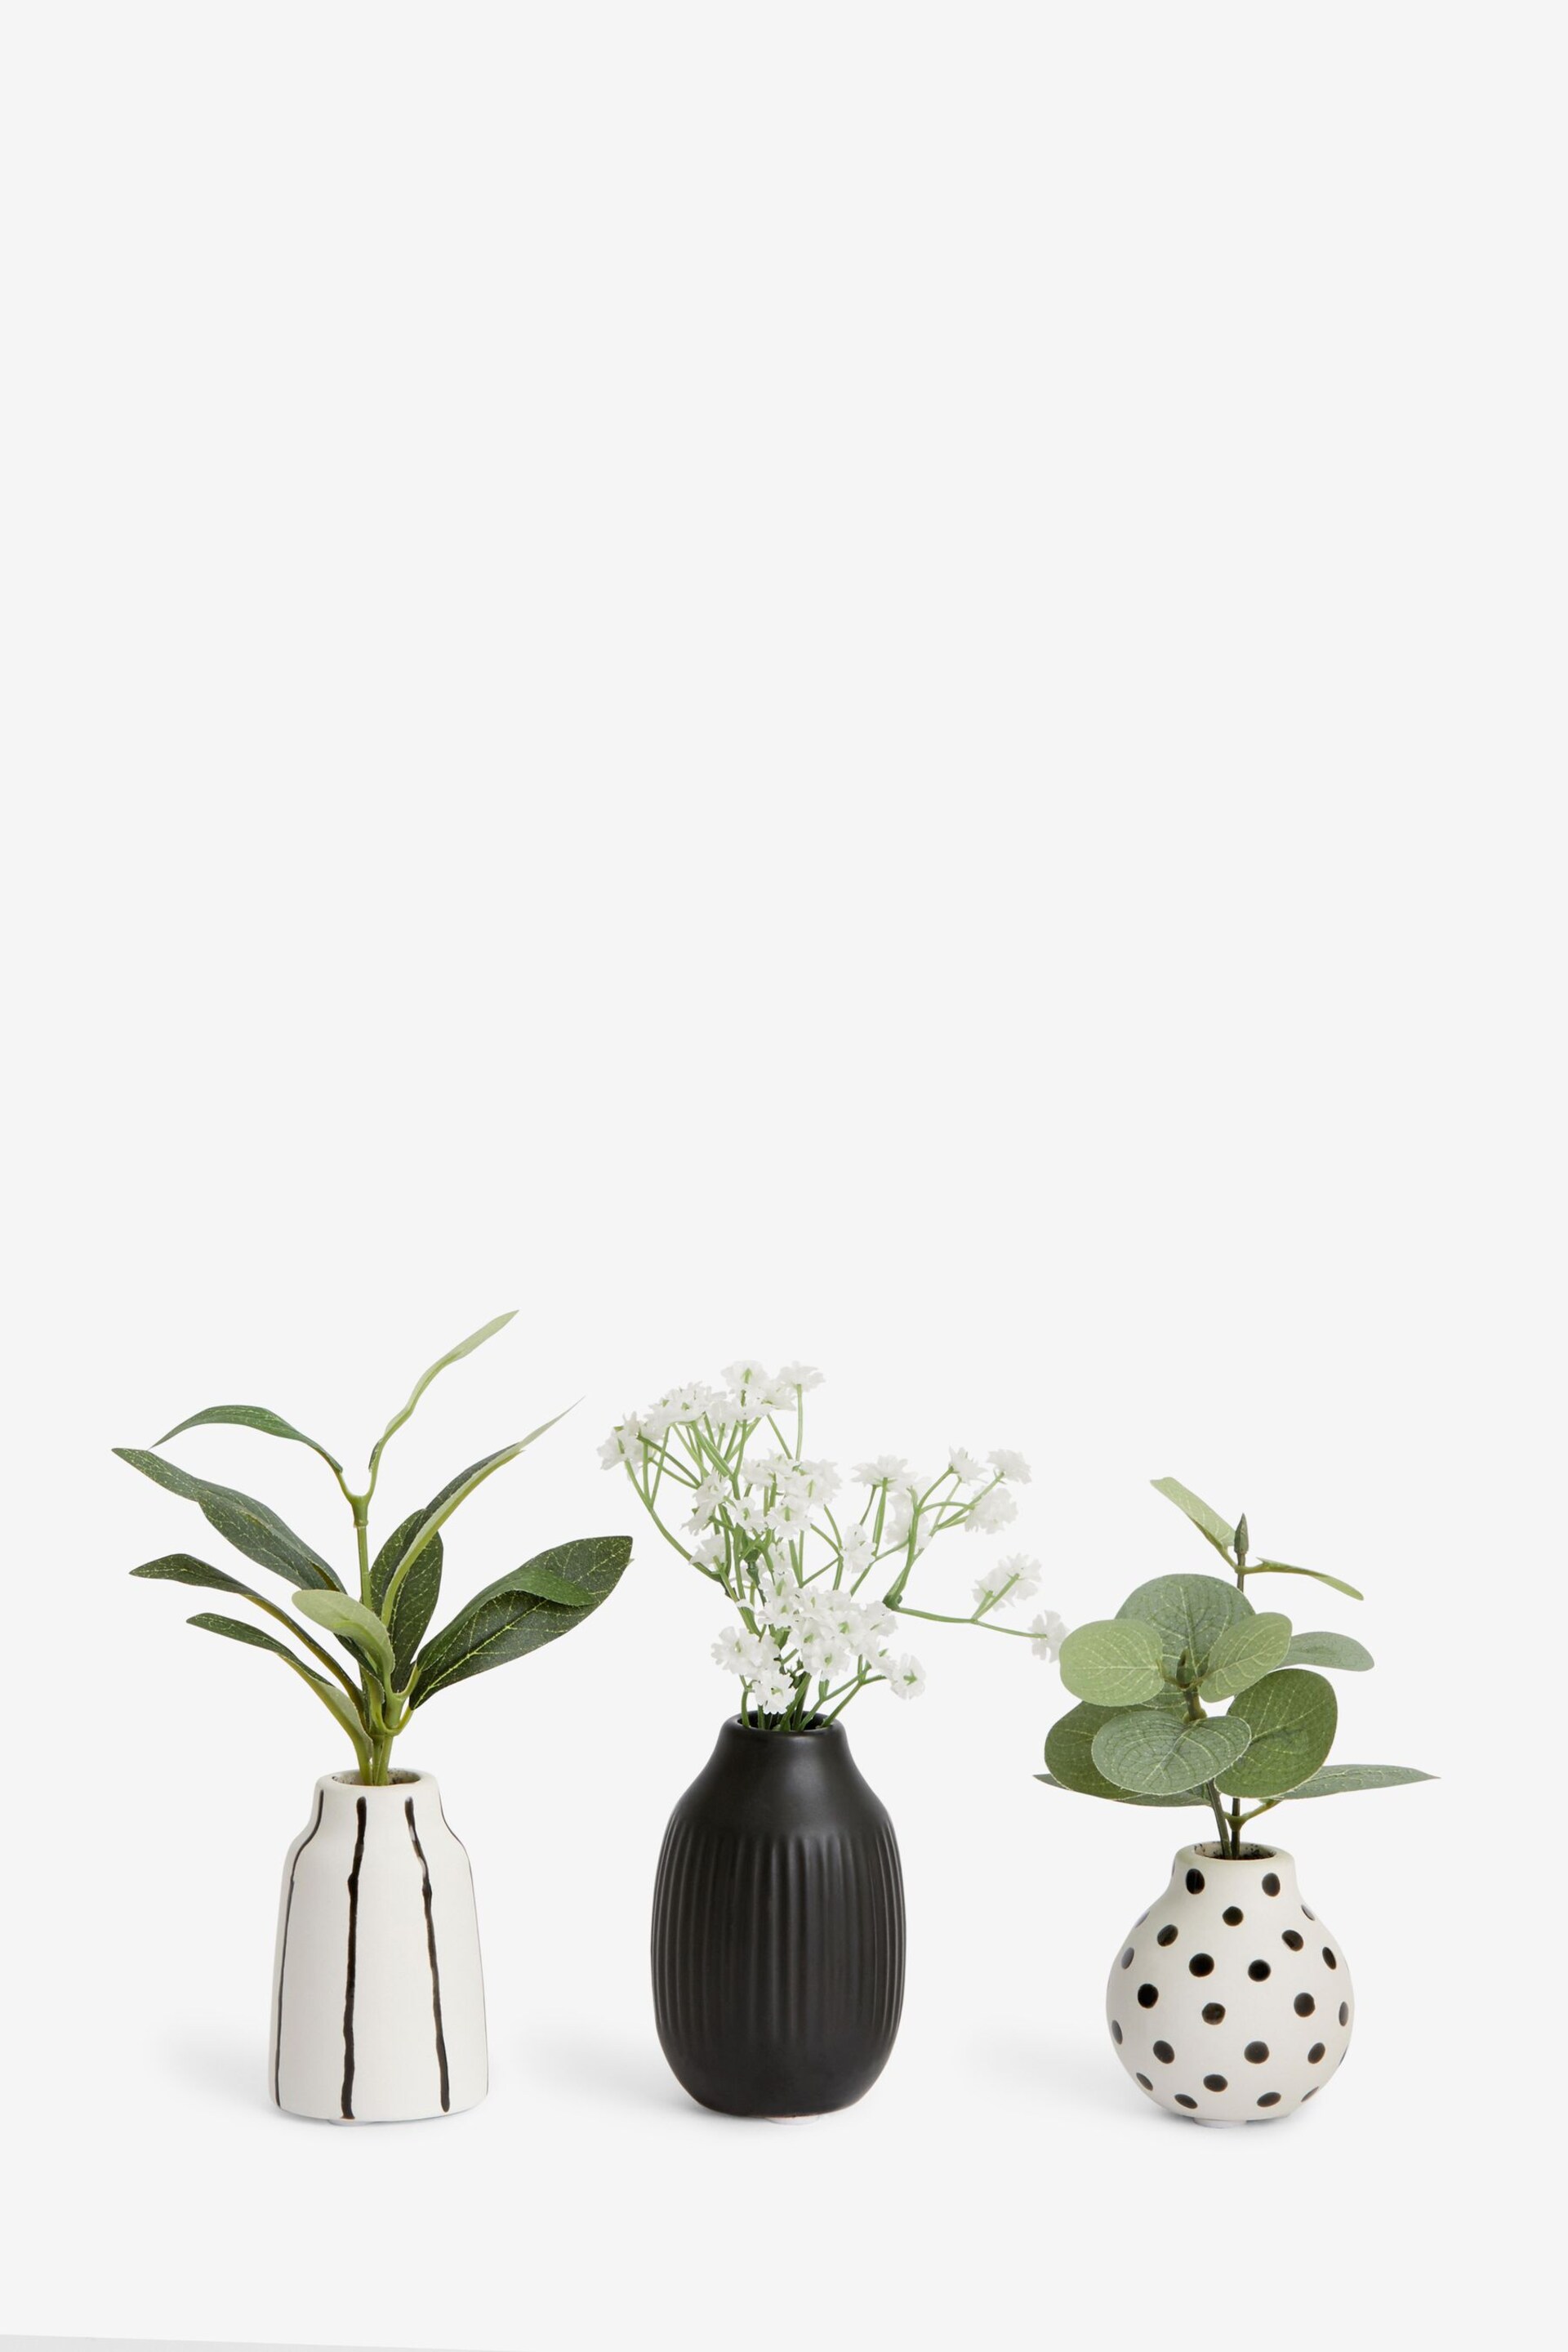 Set of 3 Green Artificial Plants In Monochrome Ceramic Pots - Image 2 of 3